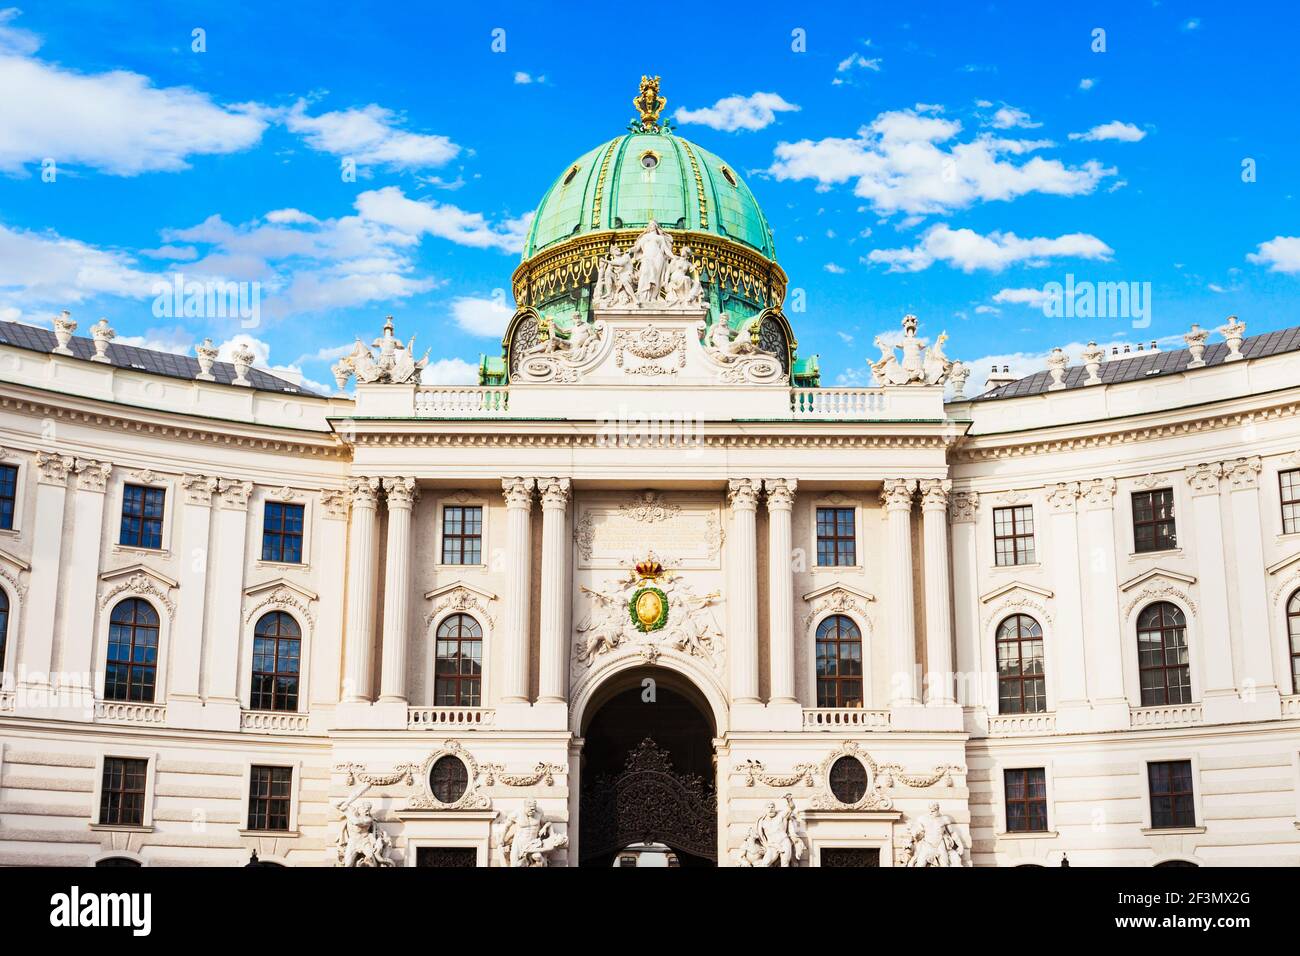 The Hofburg is the imperial palace in Heldenplatz square in the centre of Vienna, Austria. The Hofburg Palace built in the 13th  century. Stock Photo